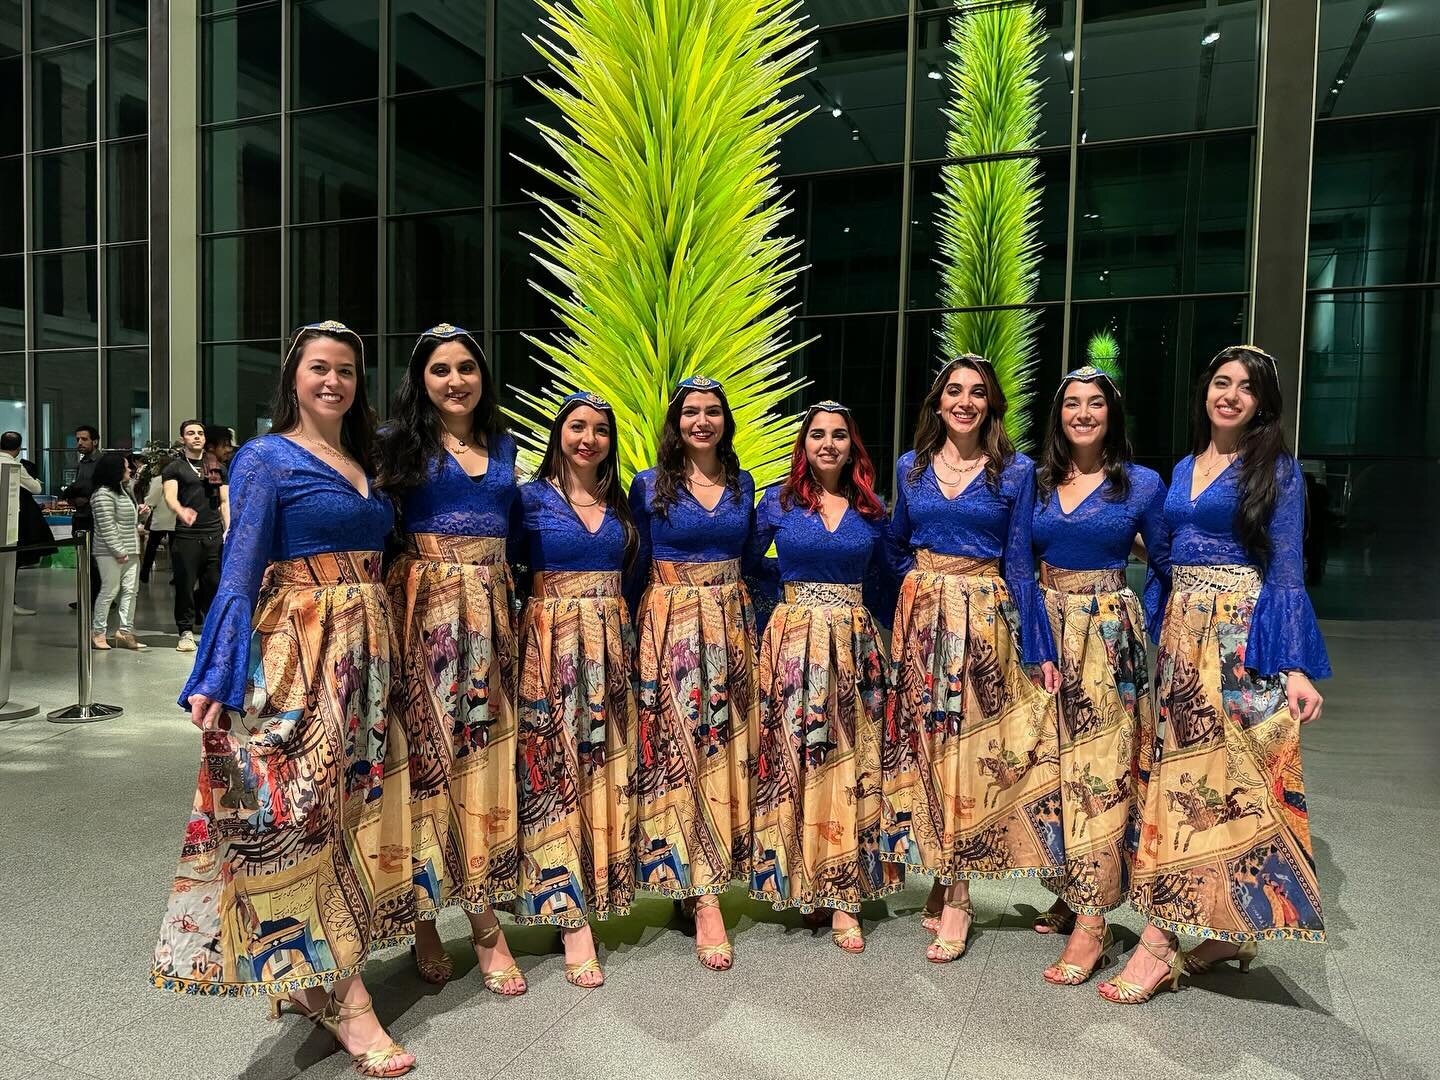 We had an amazing time yesterday performing at the @mfaboston annual Nowruz event!

Our season is just getting started - stay tuned for more videos &amp; dancing! 🌸❤️💃🏻

#aftabdancegroup #nowruz1403 #persiannewyear #persiandance #norooz #iranianda